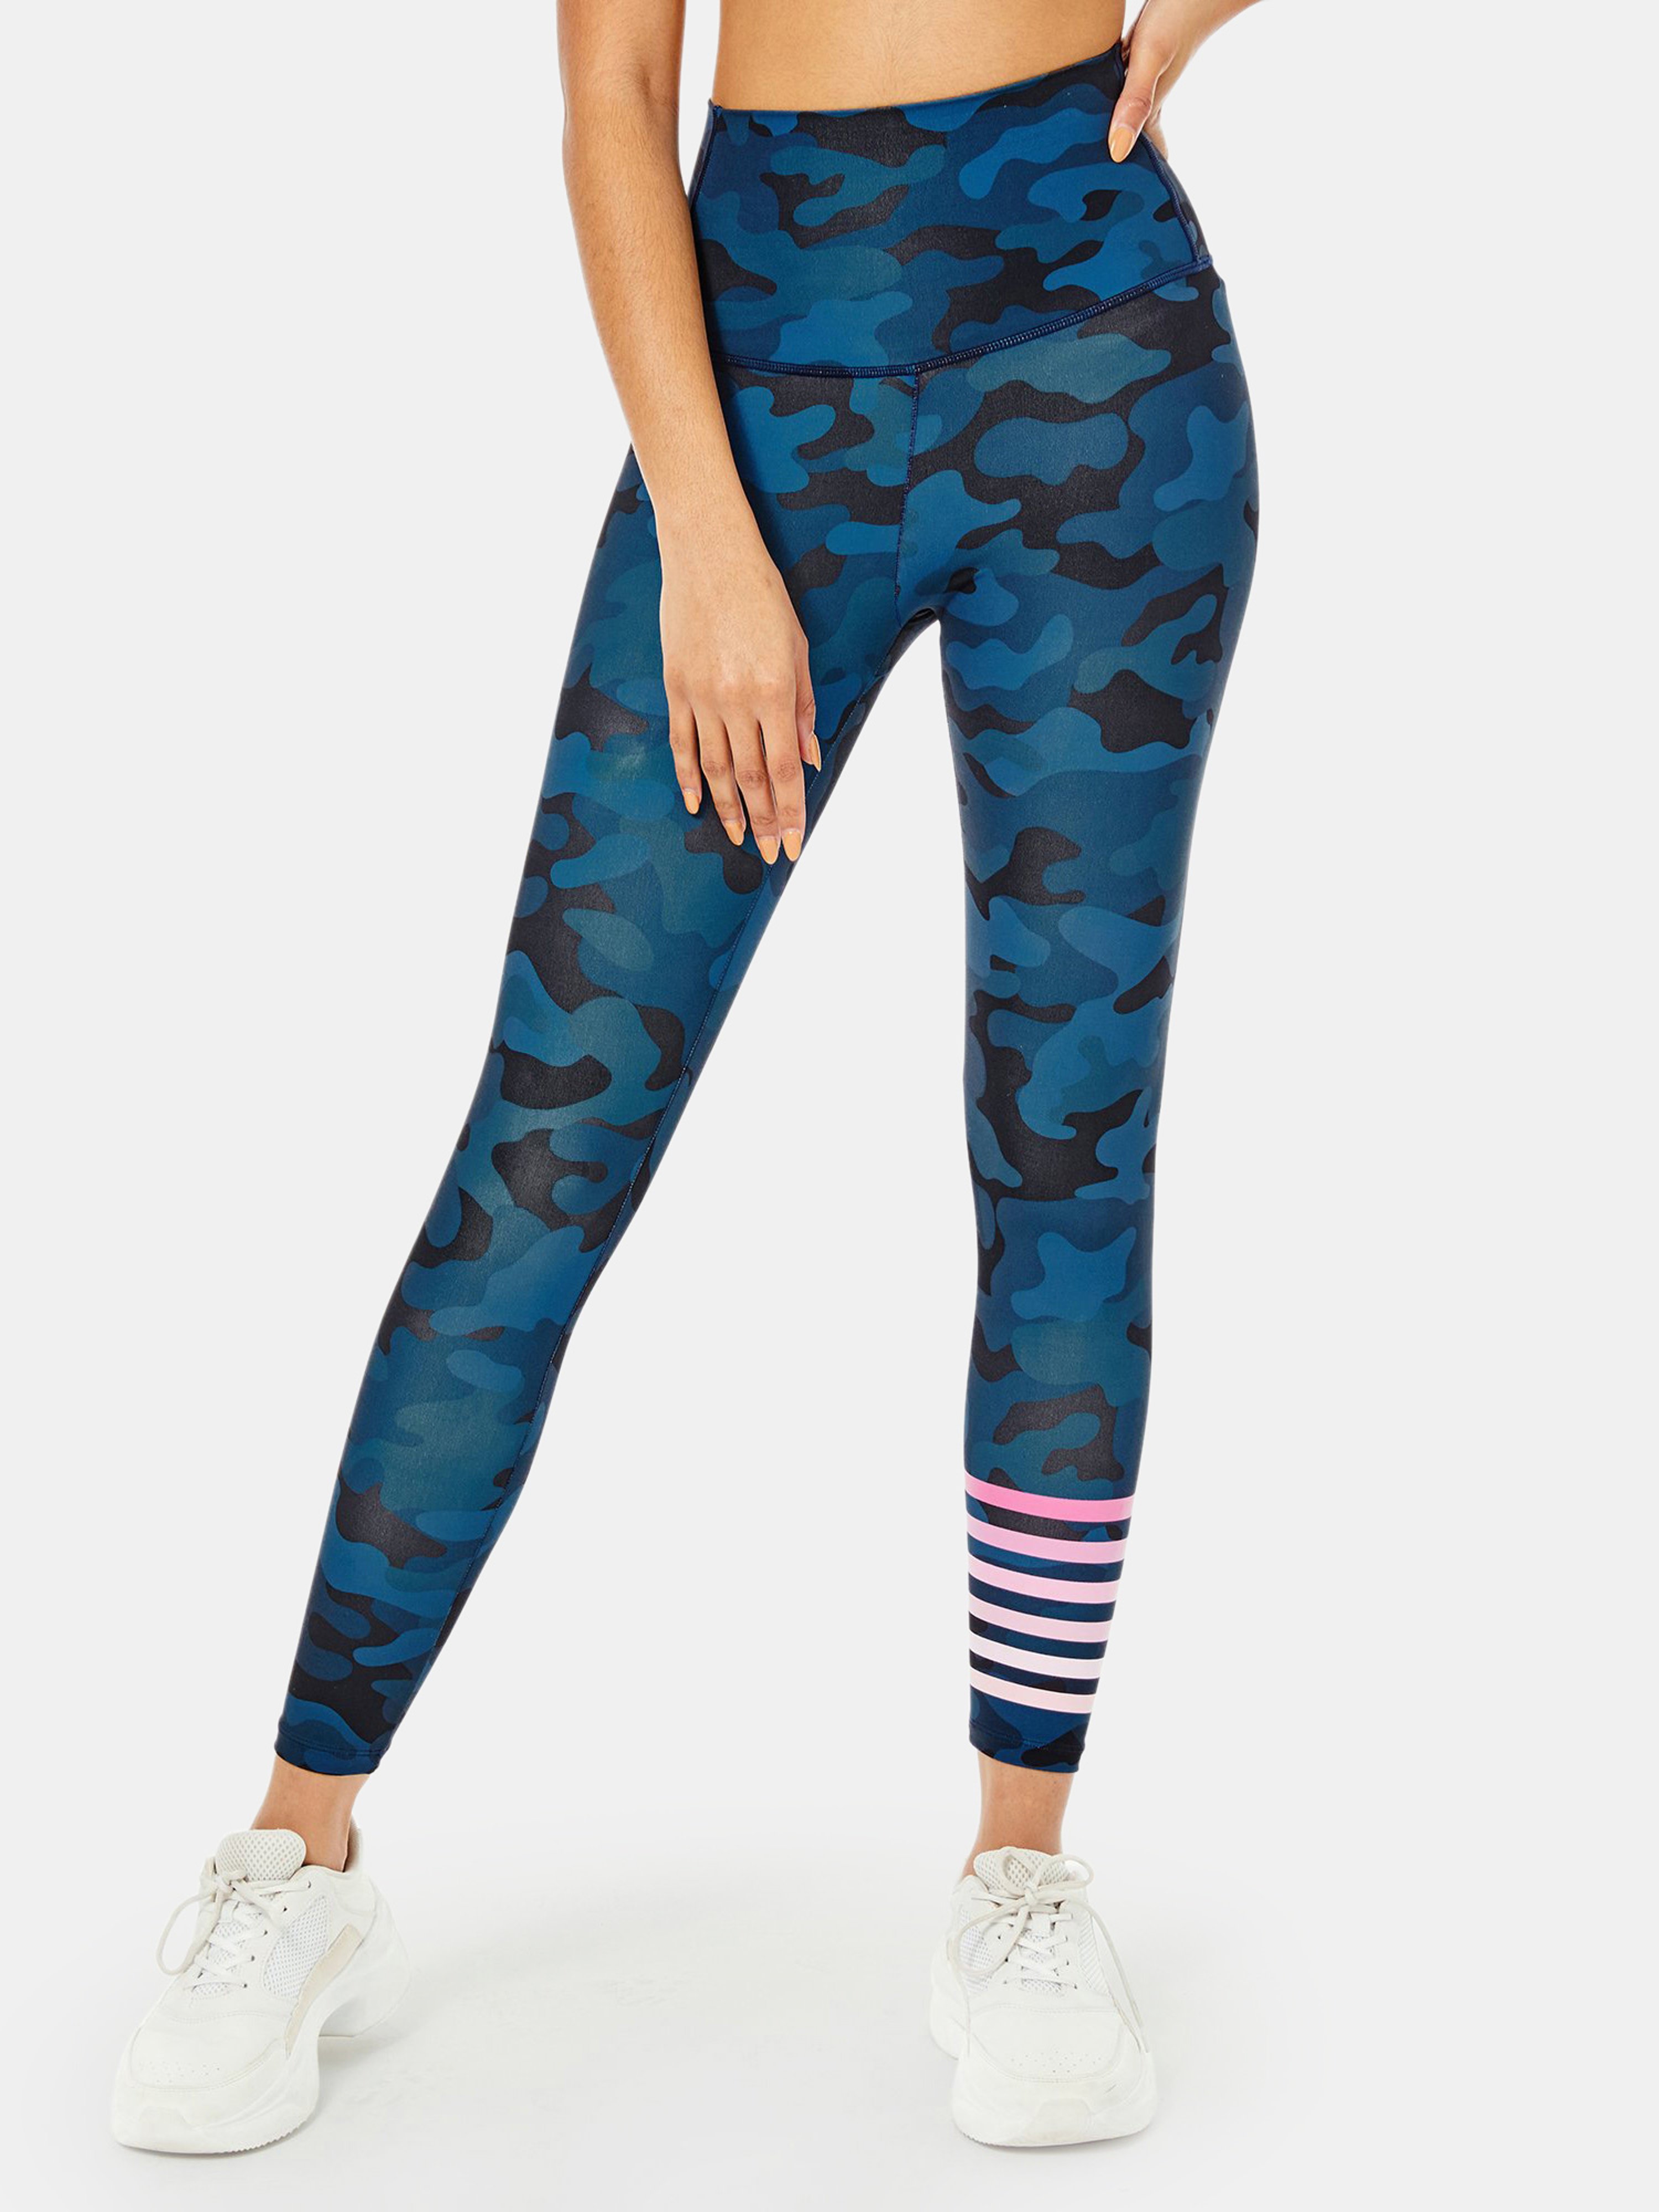 Addison Bay The Everyday Legging 2.0 In Blue